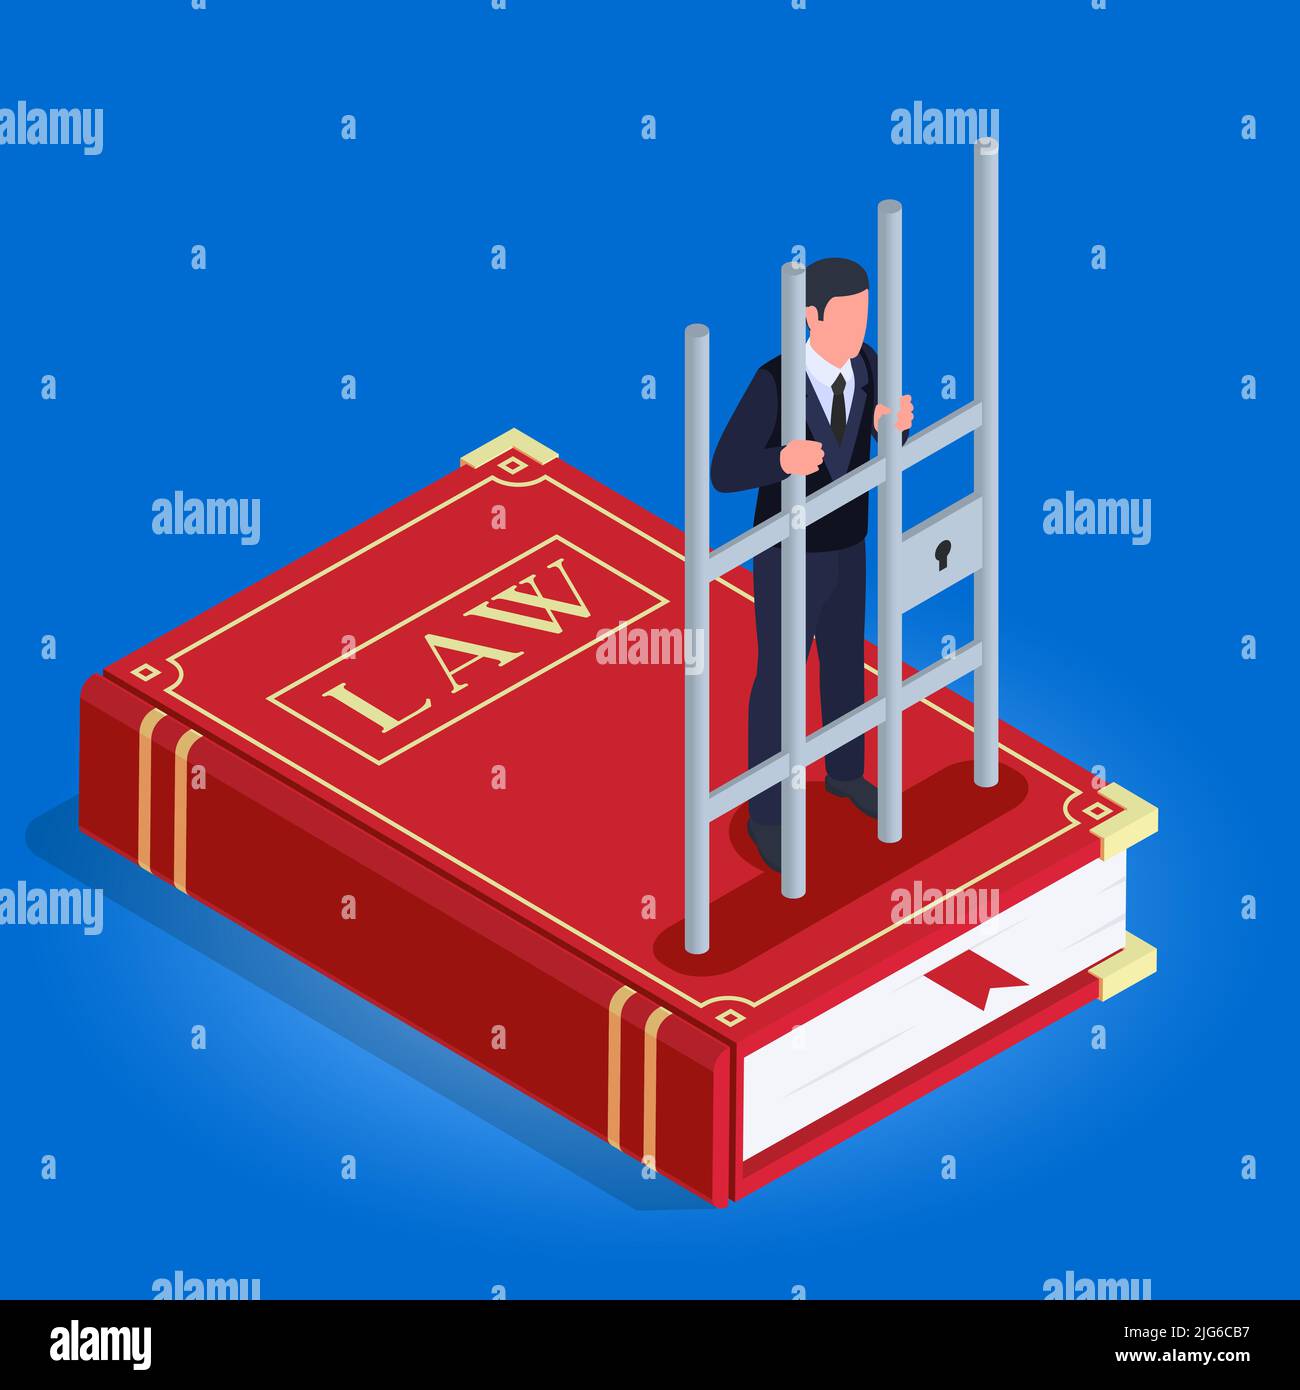 Corruption bribery money laundering isometric background with convicted criminal behind bars stands on law book vector illustration Stock Vector